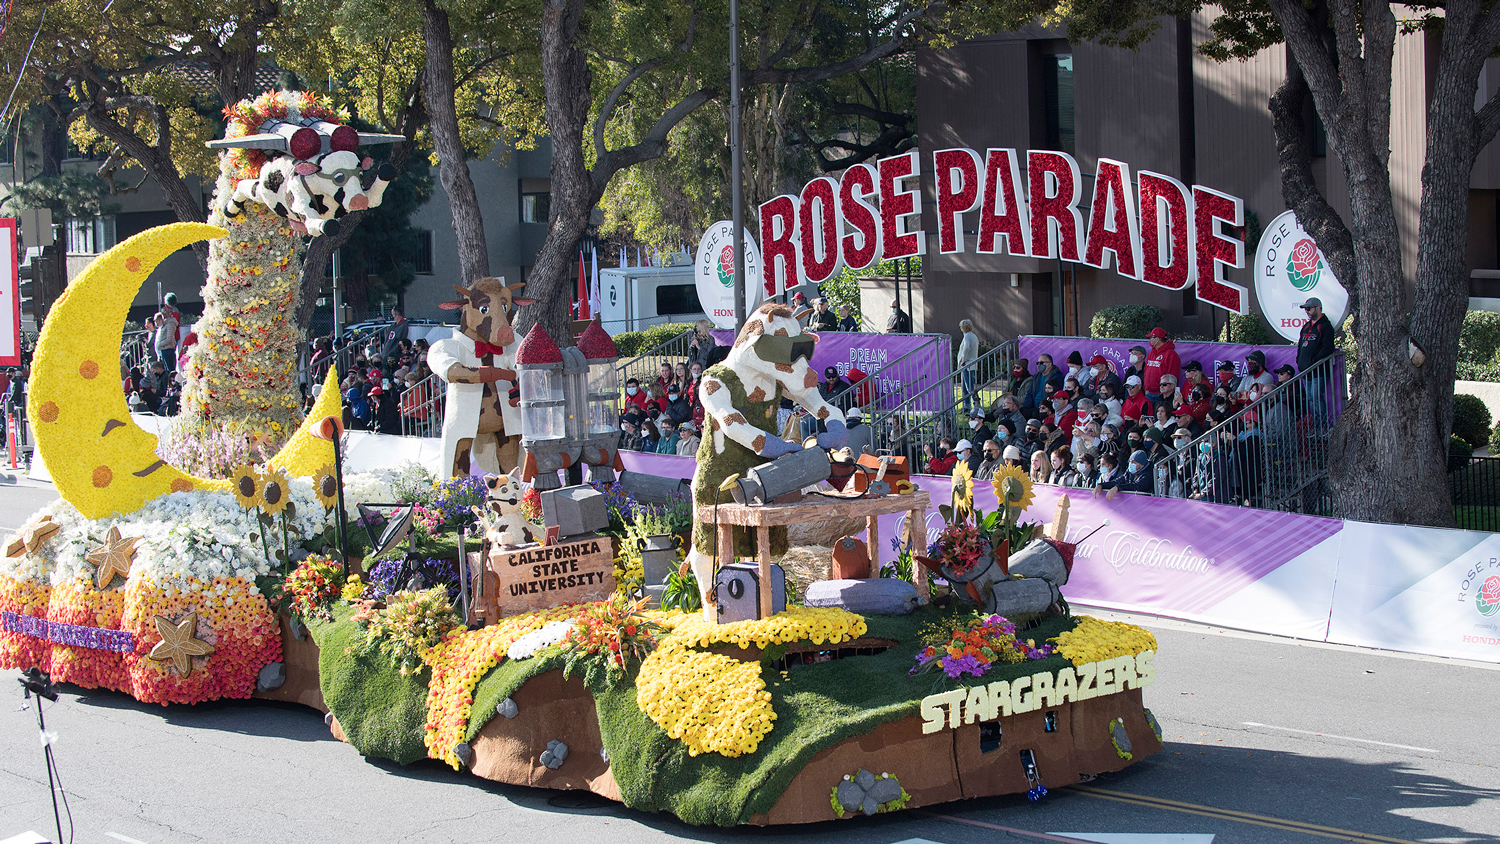 Cal Poly Schedule 2022 Cal Poly Float Wins Animation Award At 2022 Rose Parade® | Cal Poly